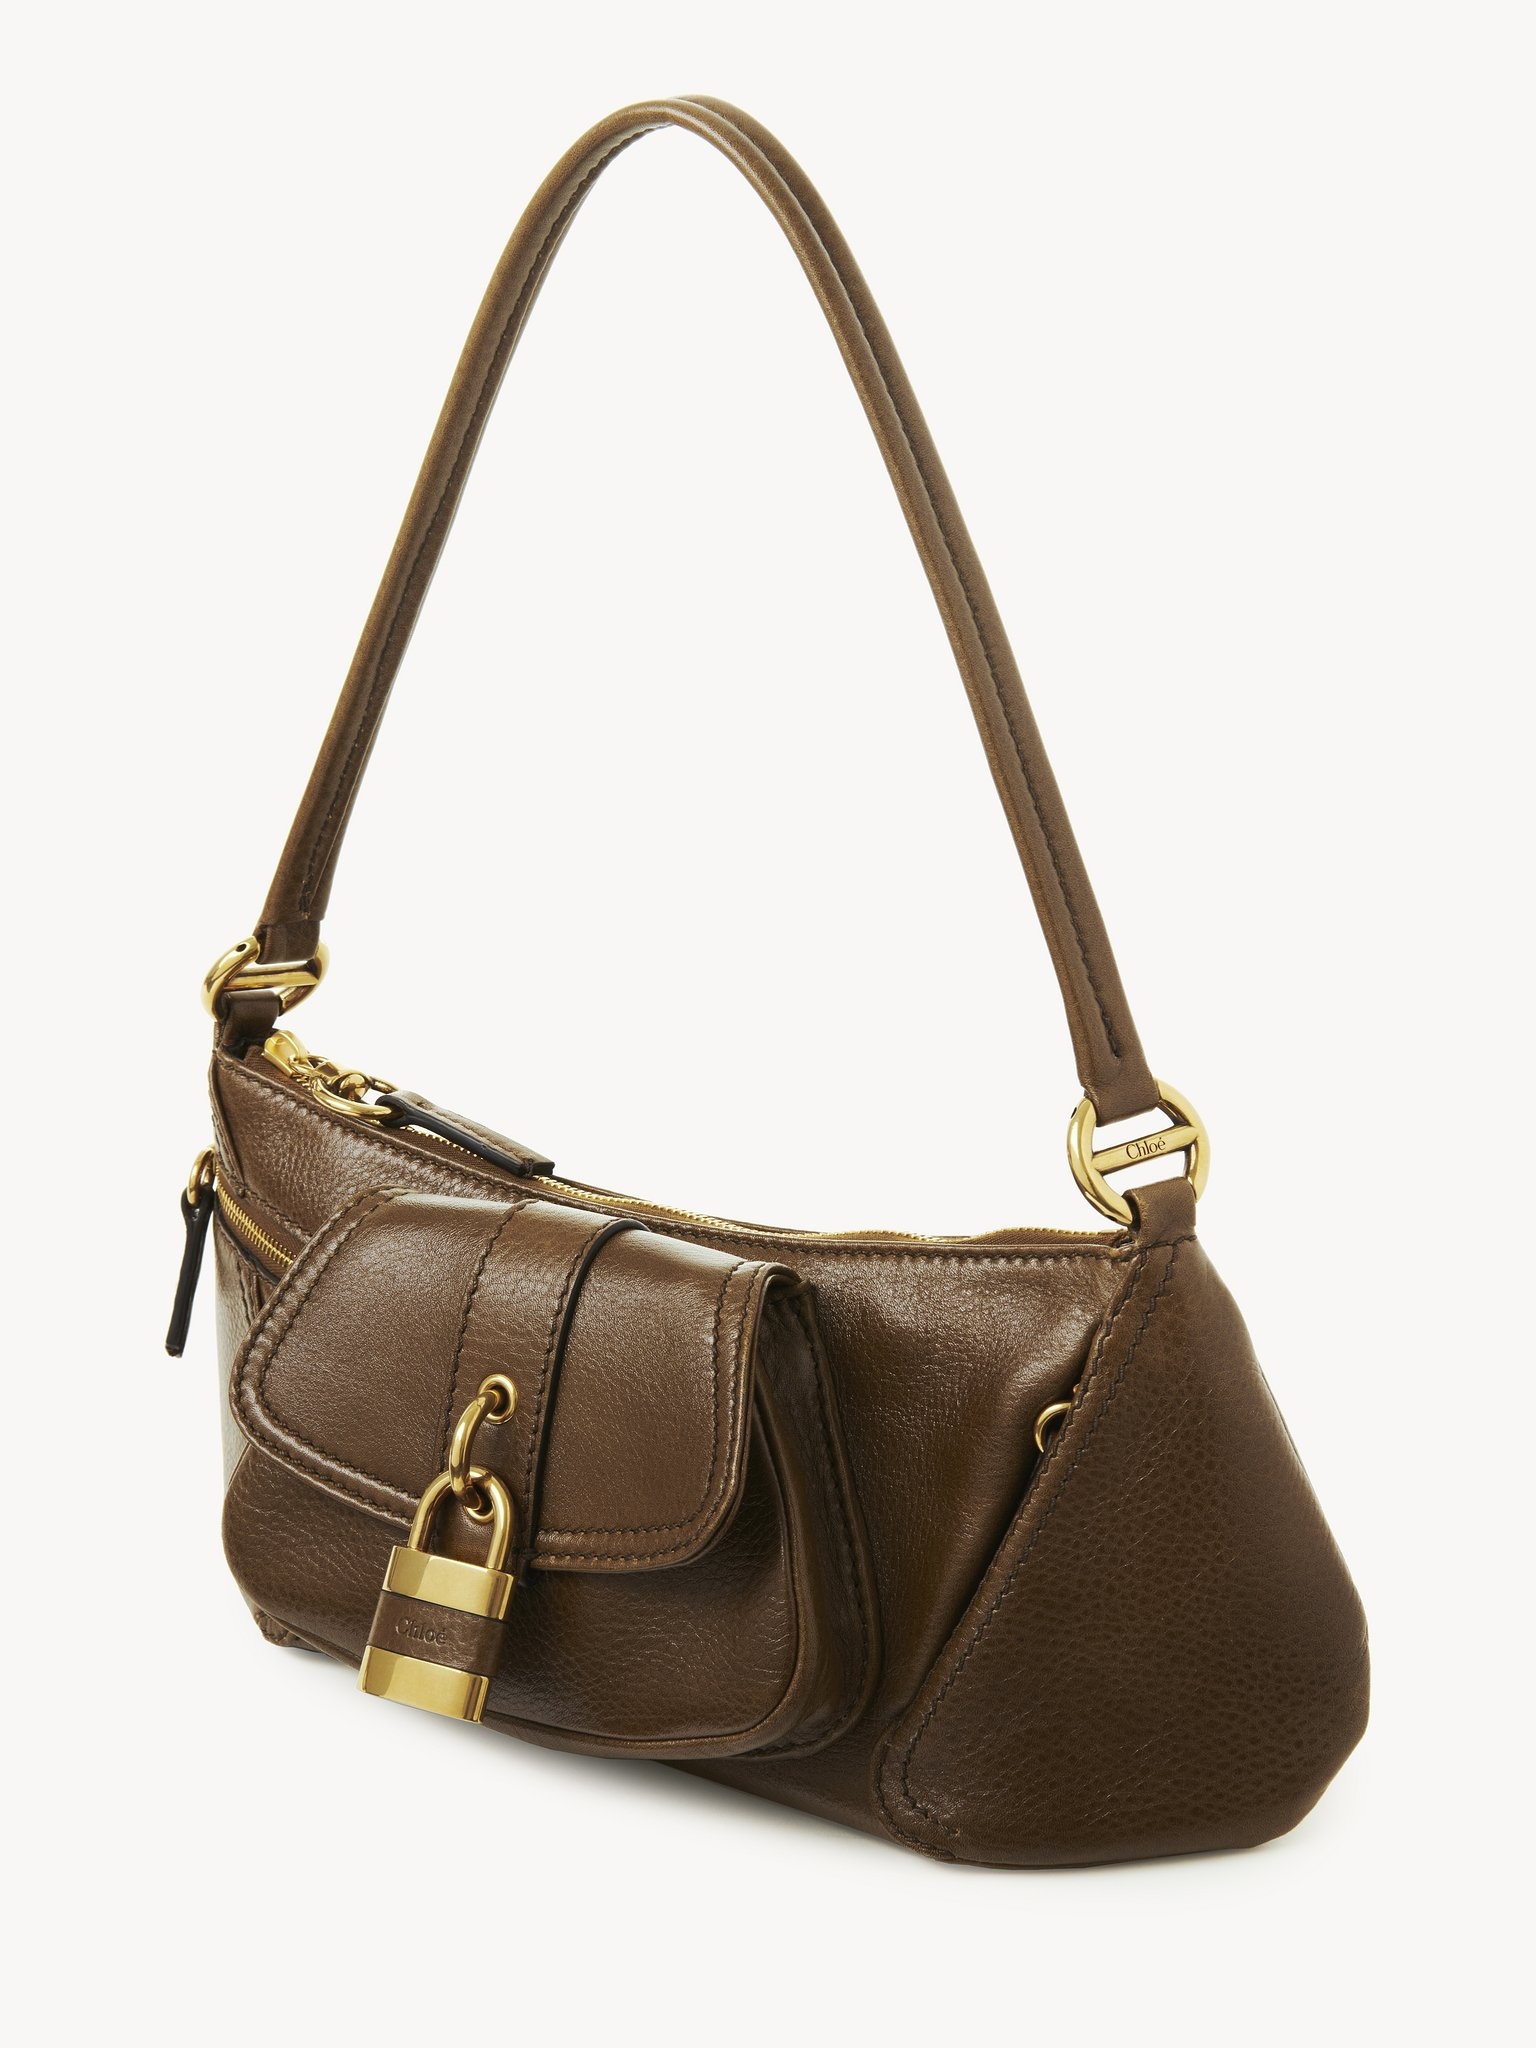 THE 99 SHOULDER BAG IN GRAINED LEATHER - 3